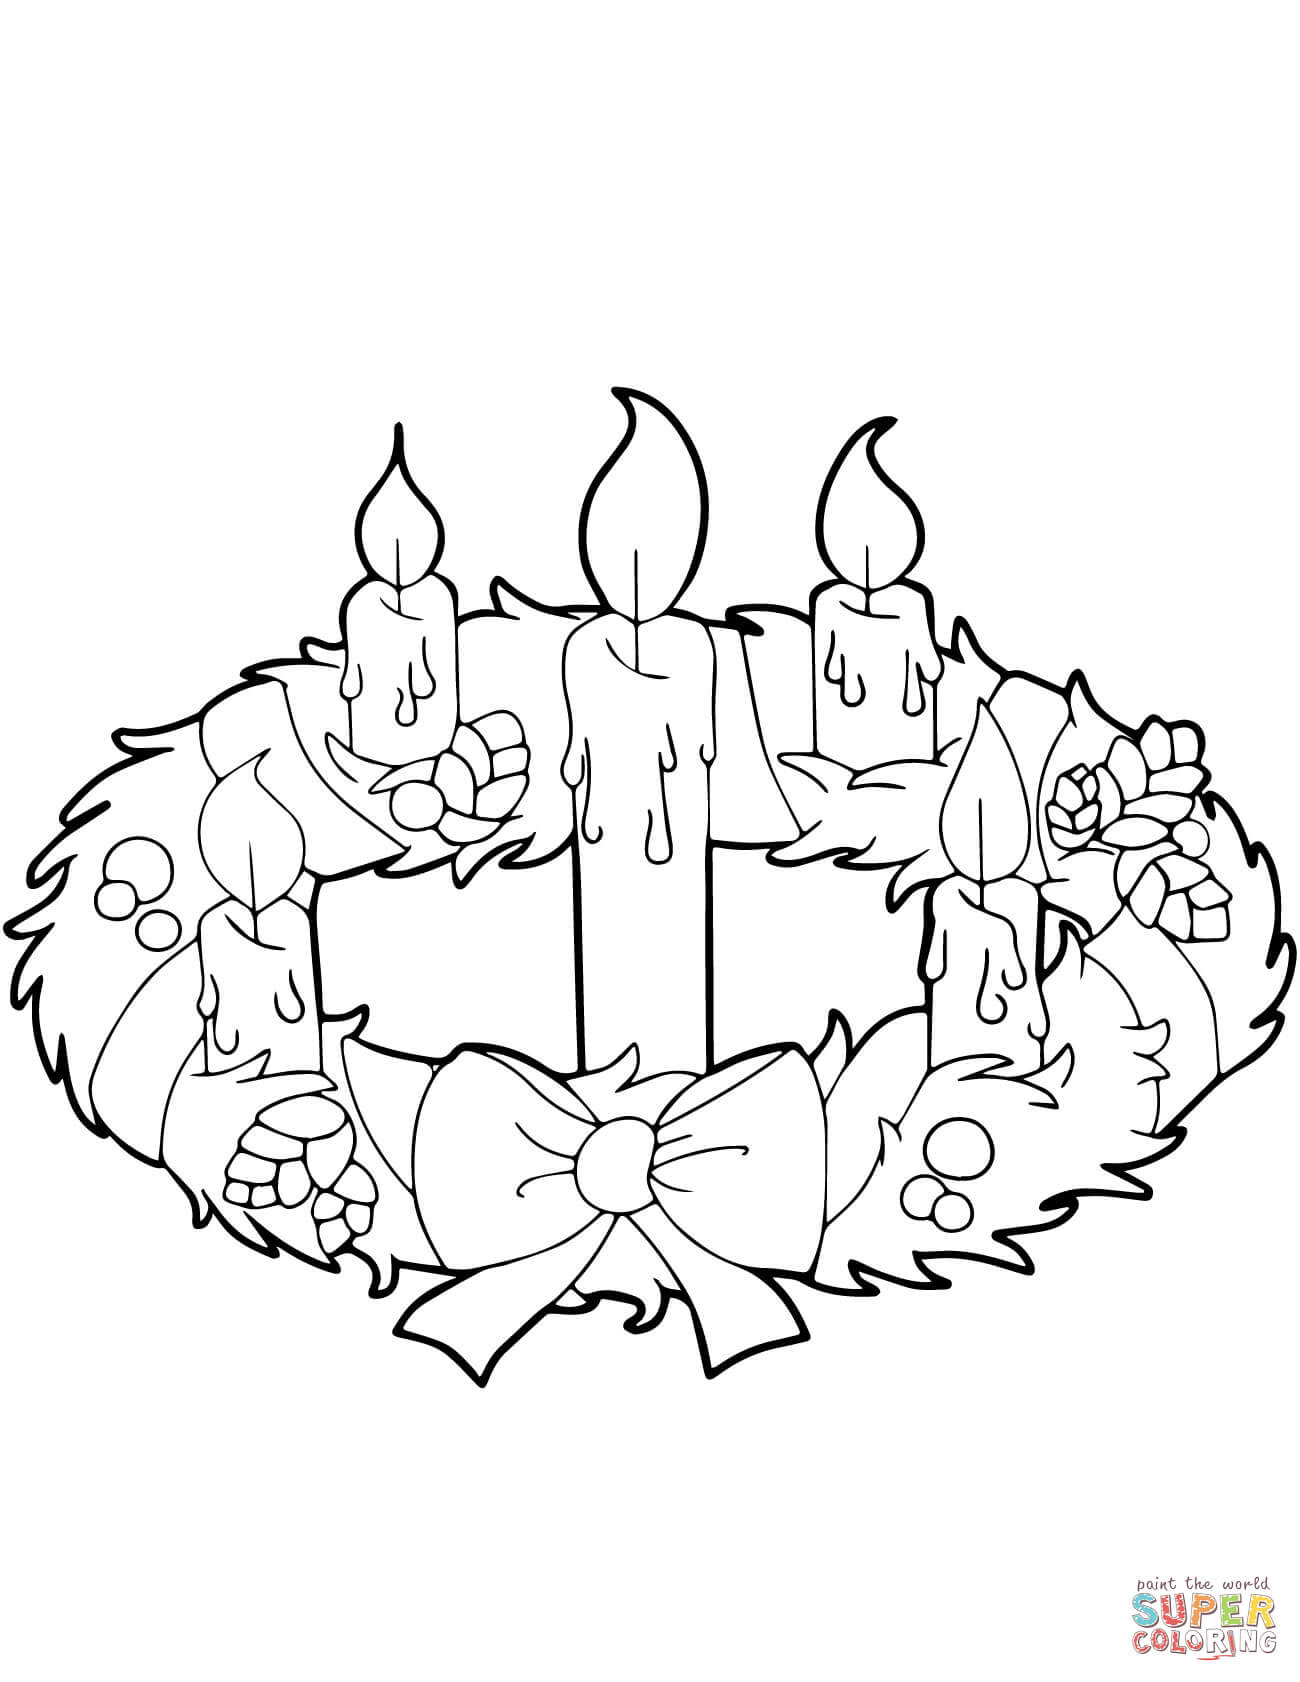 Advent-Wreath-and-Candles-coloring-page-|-Free-Printable-...